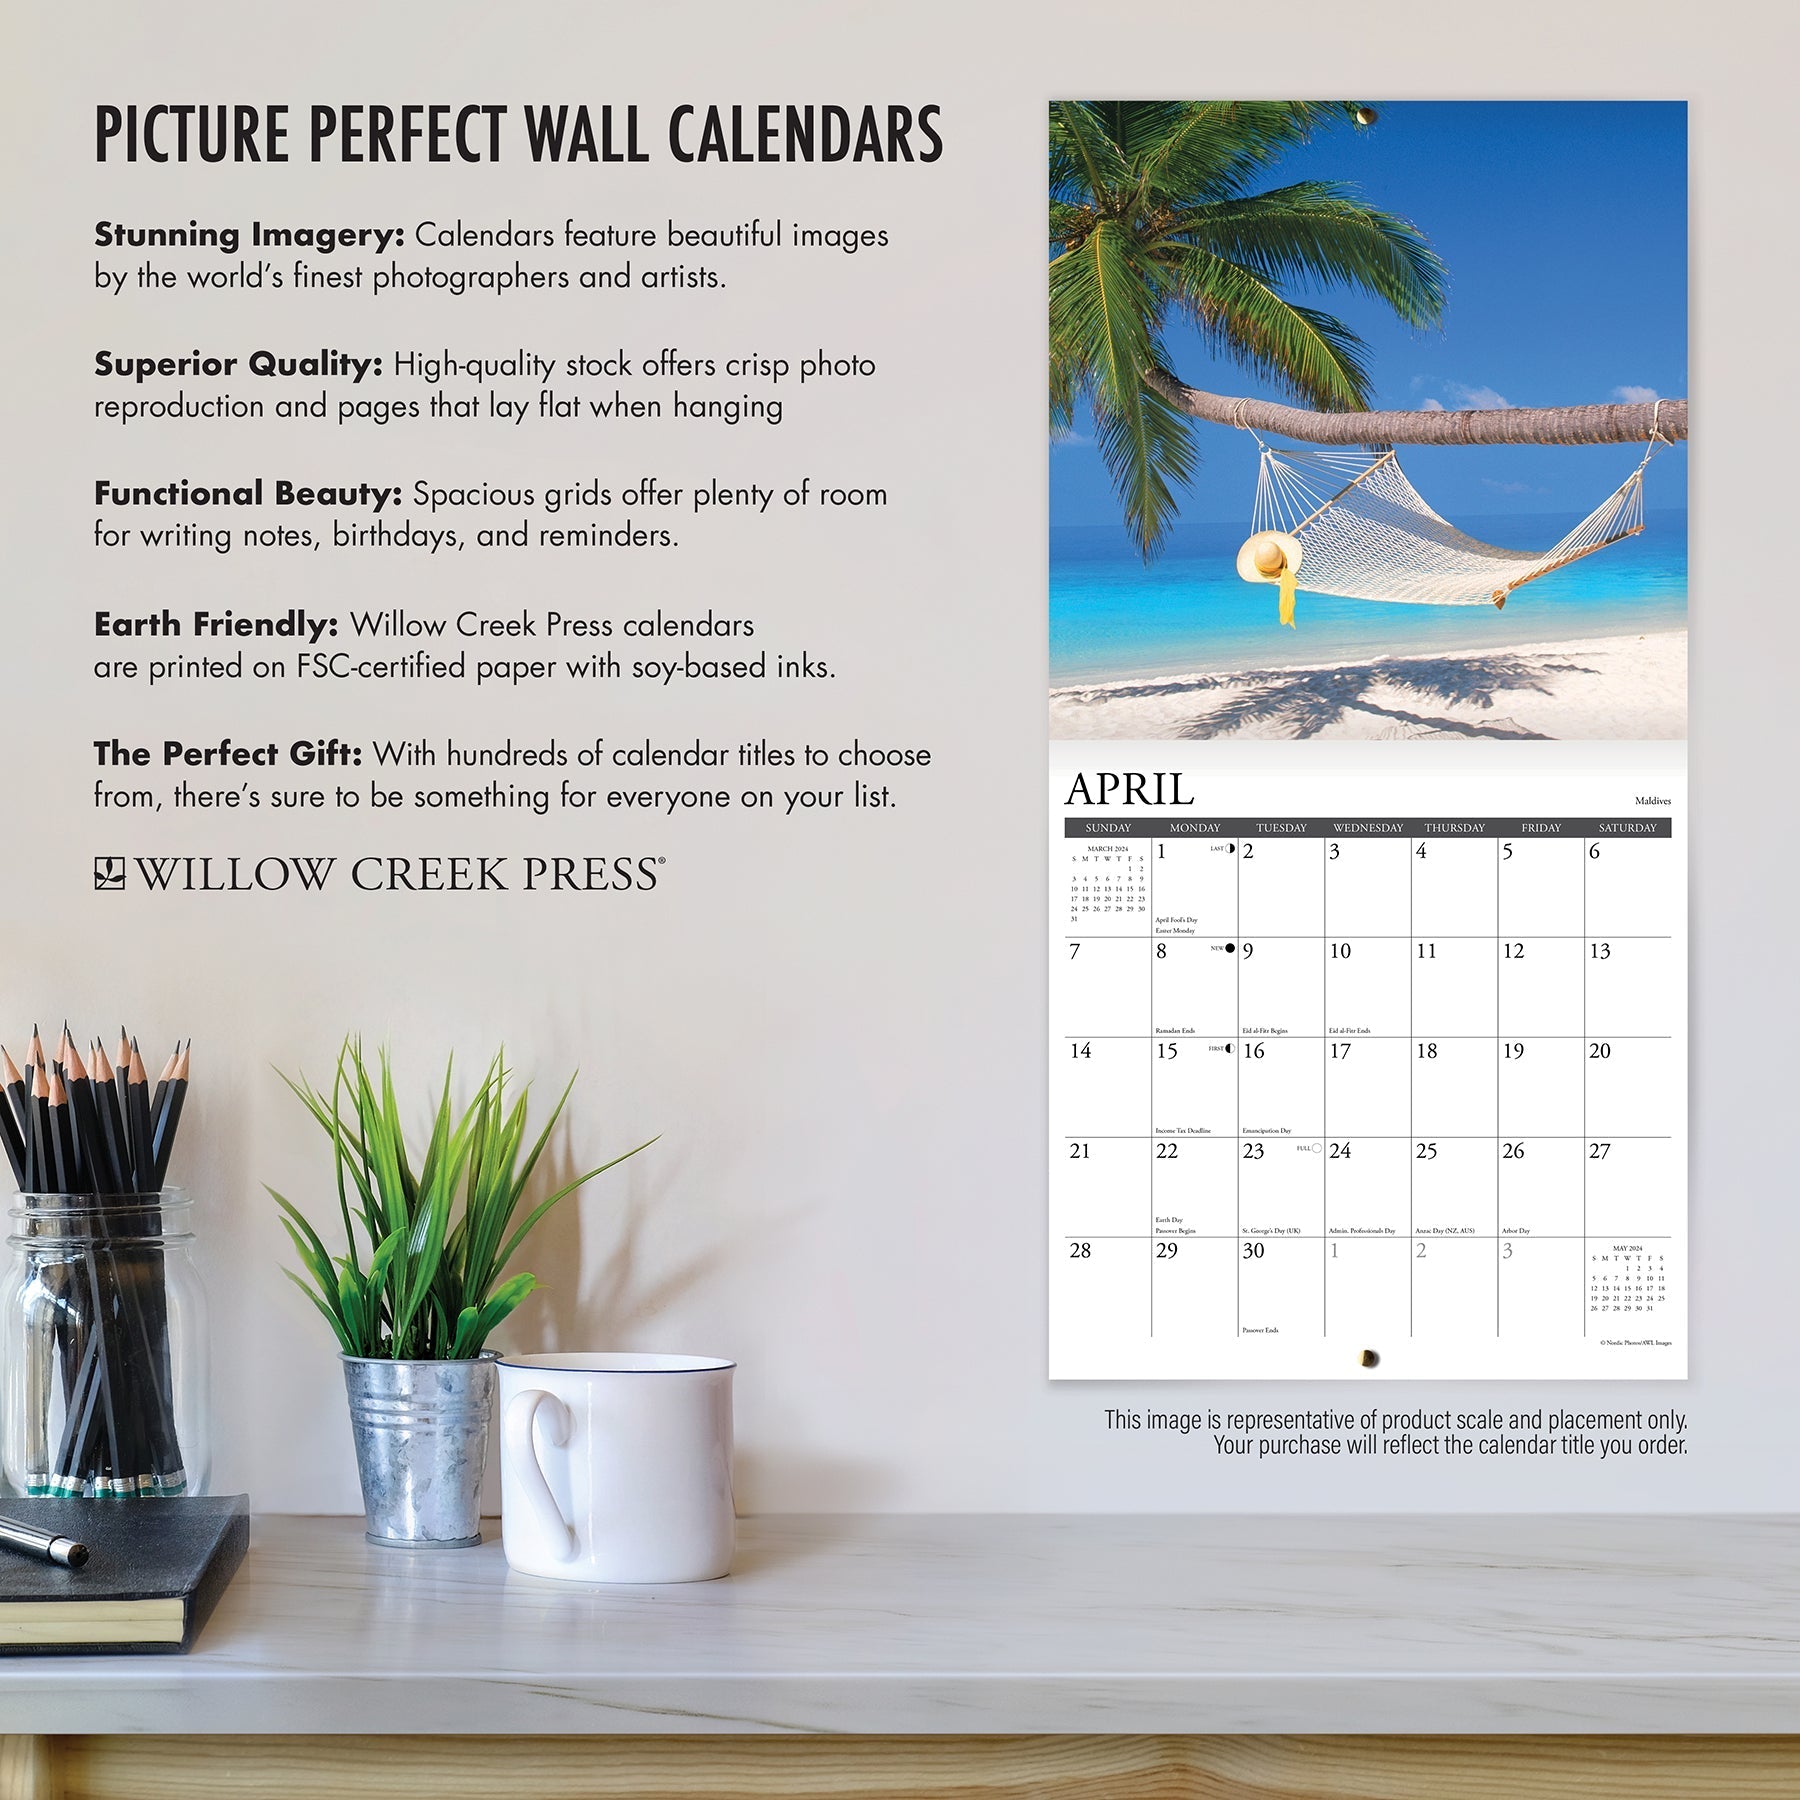 2024 Extreme Weather - Wall Calendar